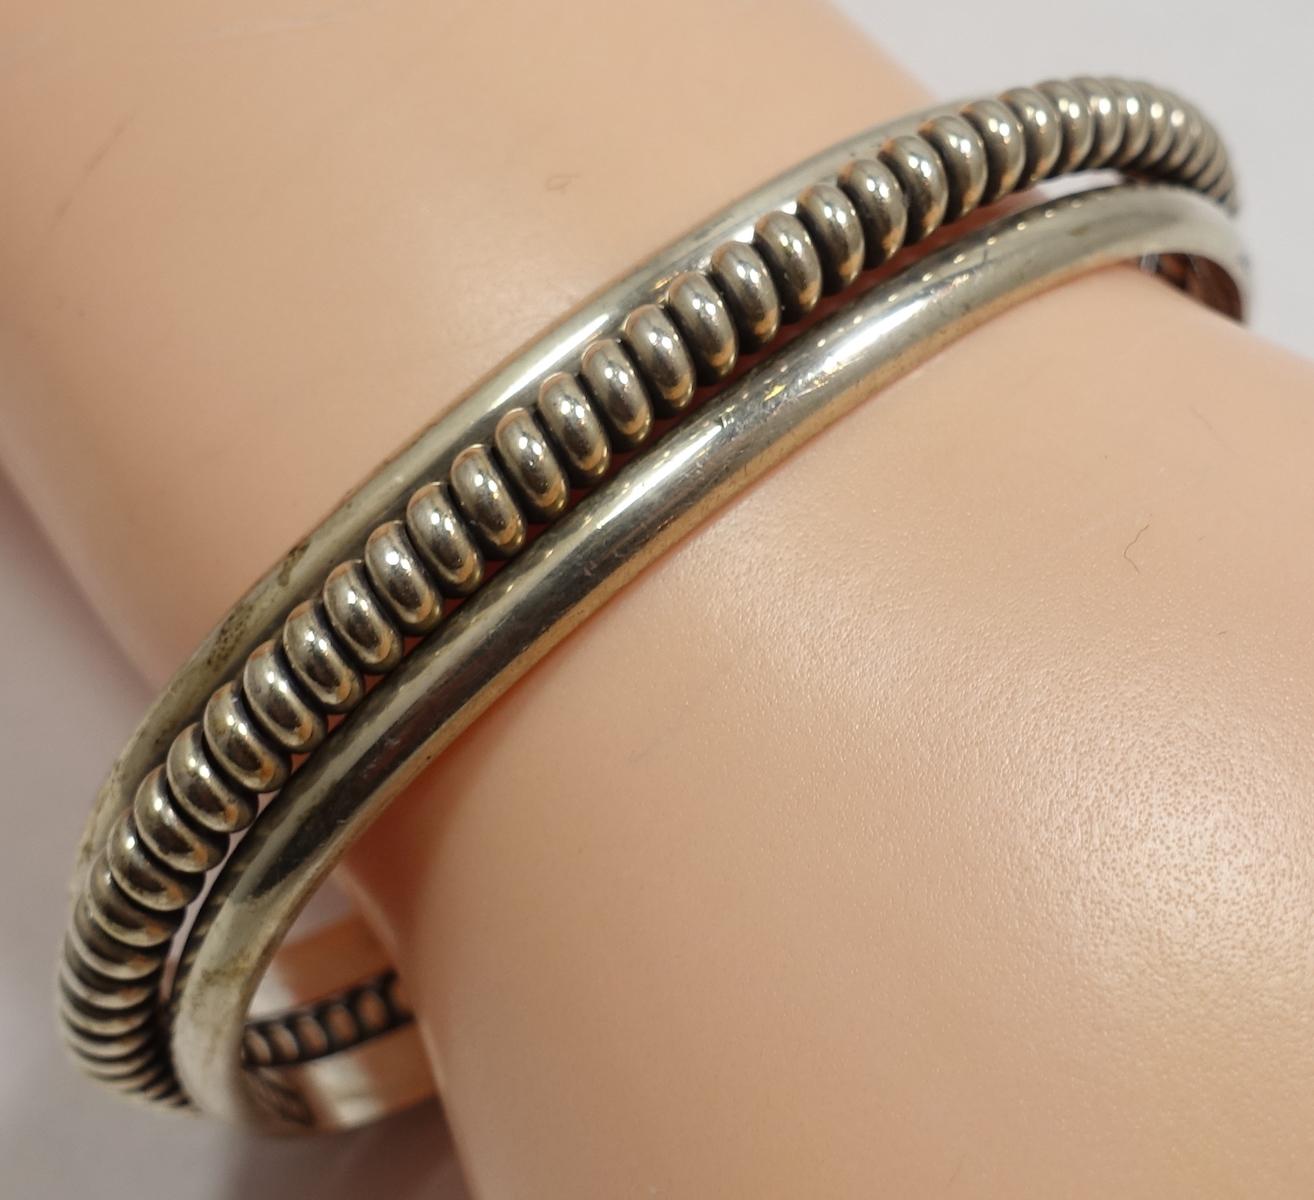 This vintage sterling silver cuff bracelet has smooth silver on the outside and a beautiful ribbed design in the middle. The cuff is adjustable and measures 6-1/2” x 3/8” and is in excellent condition.